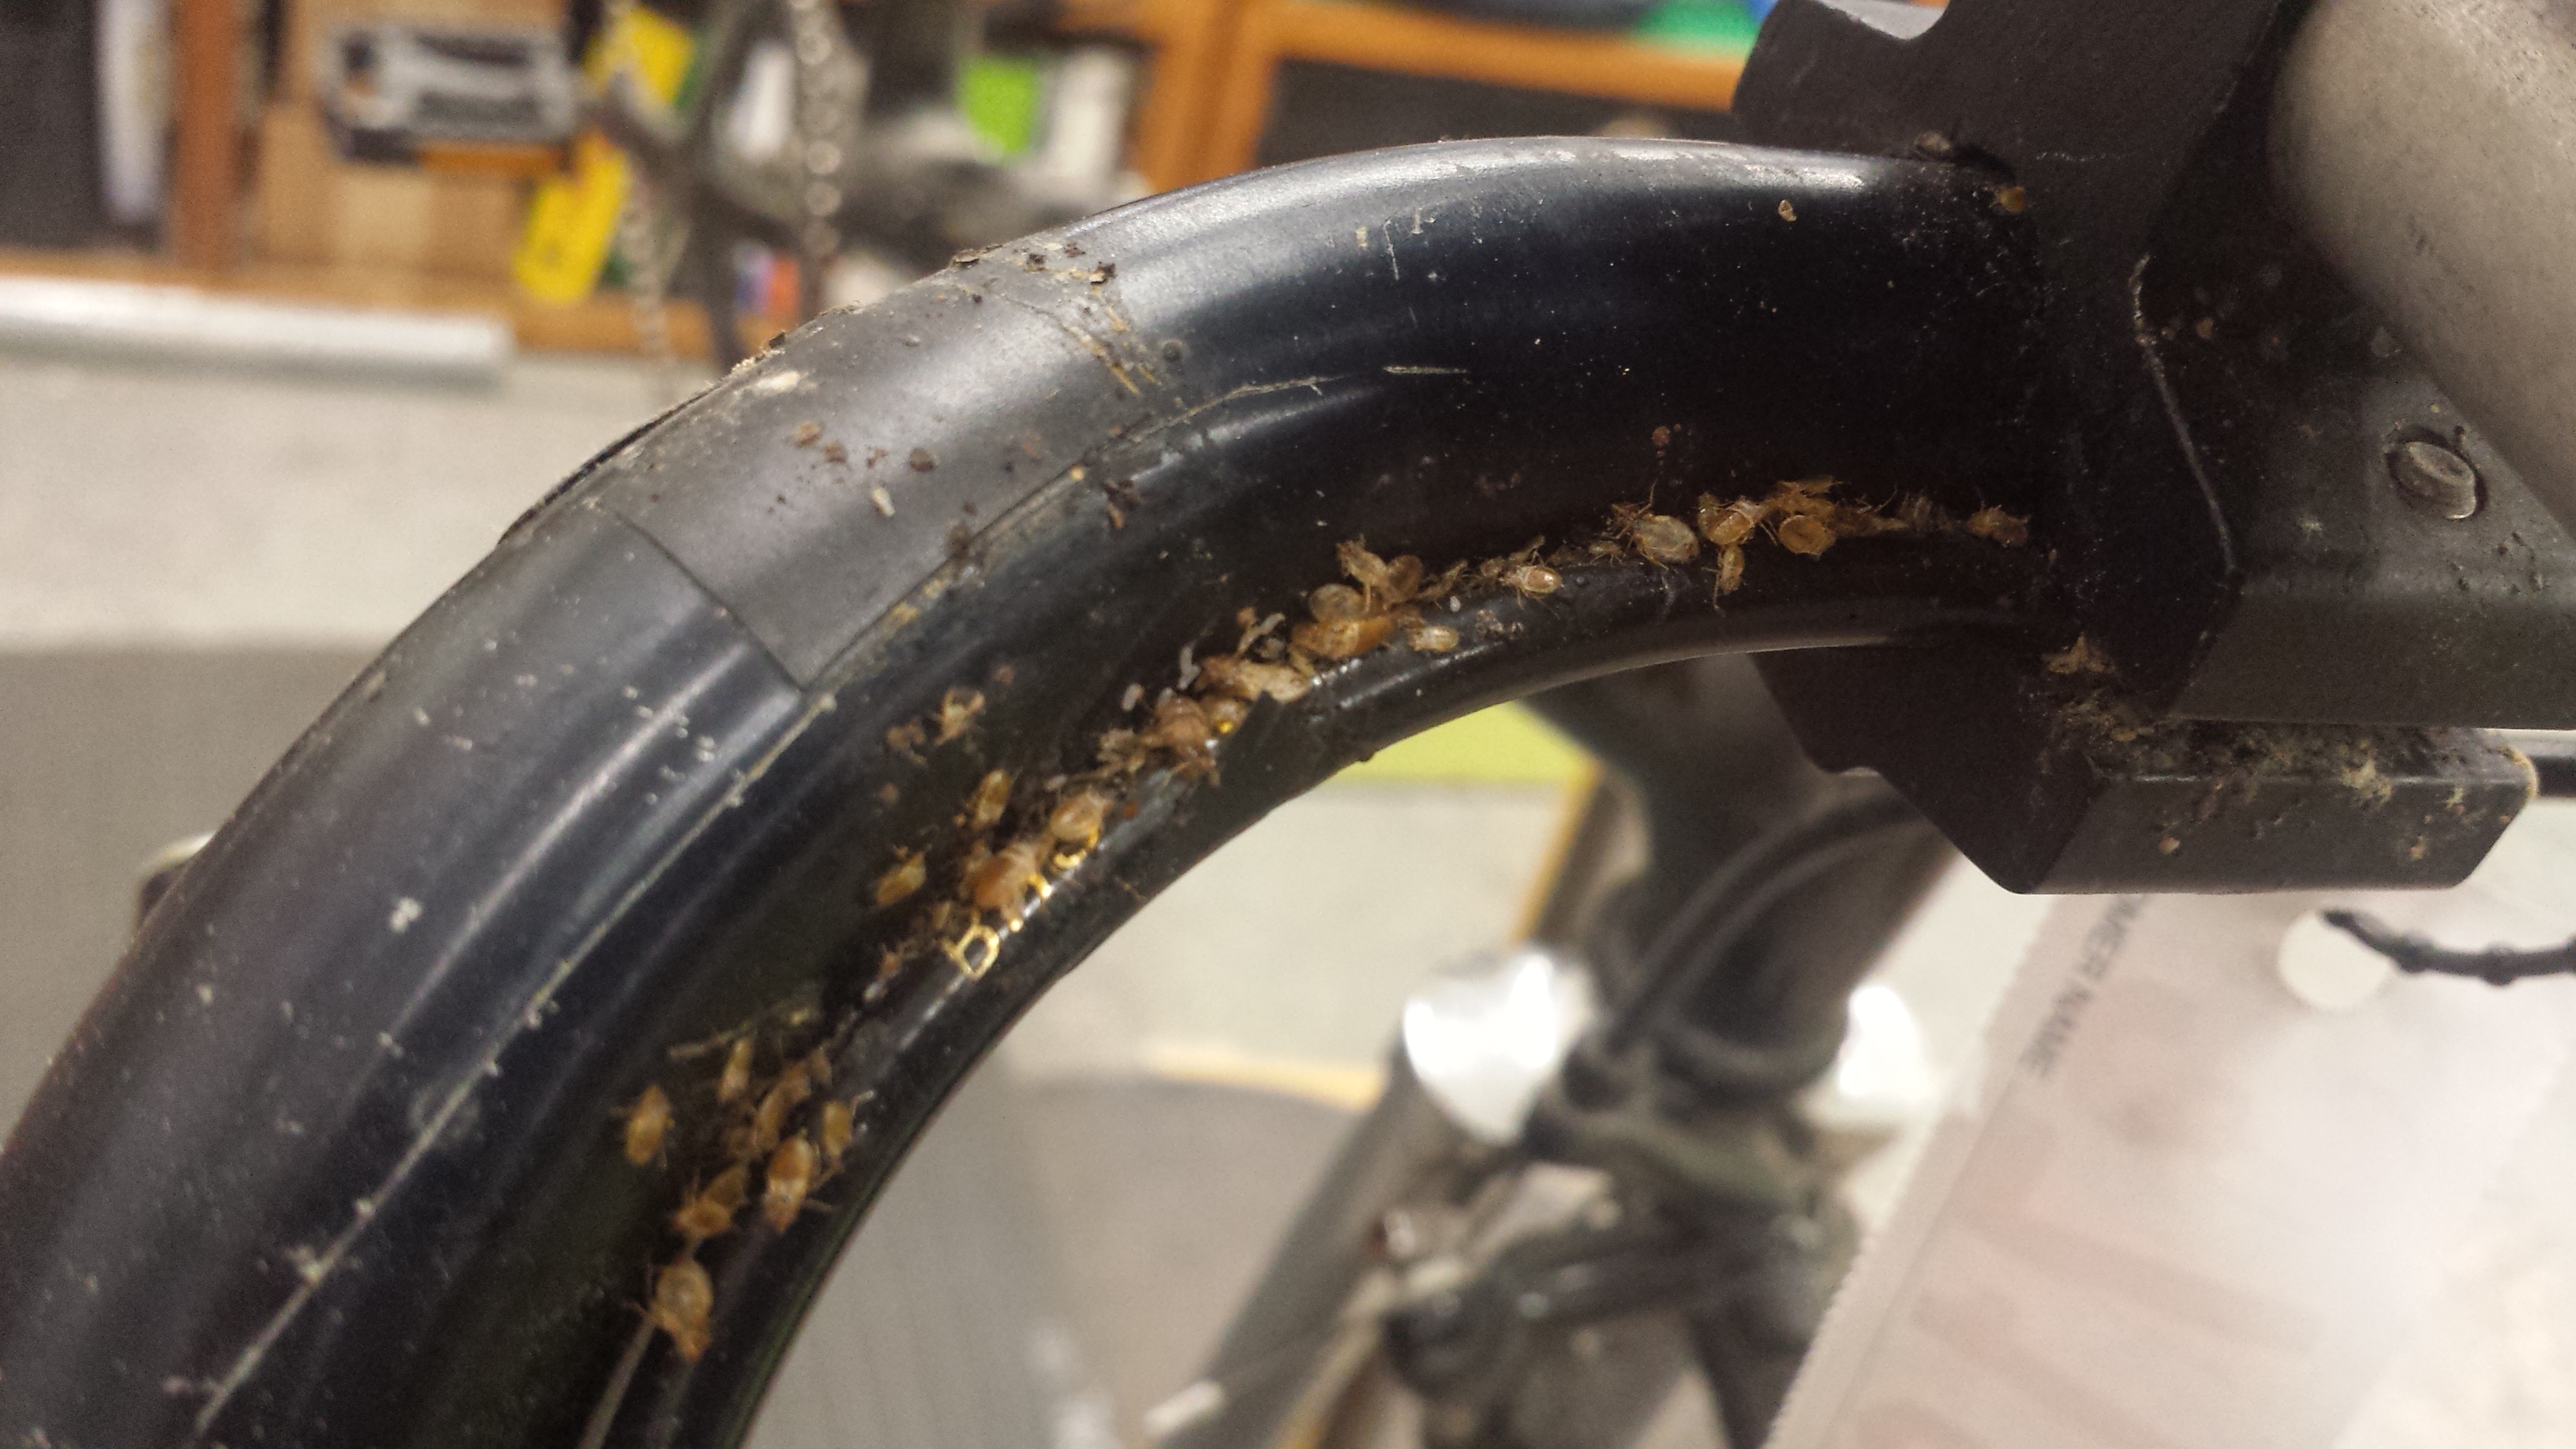 There was a BEDBUG infestation under a customers handlebar tape.